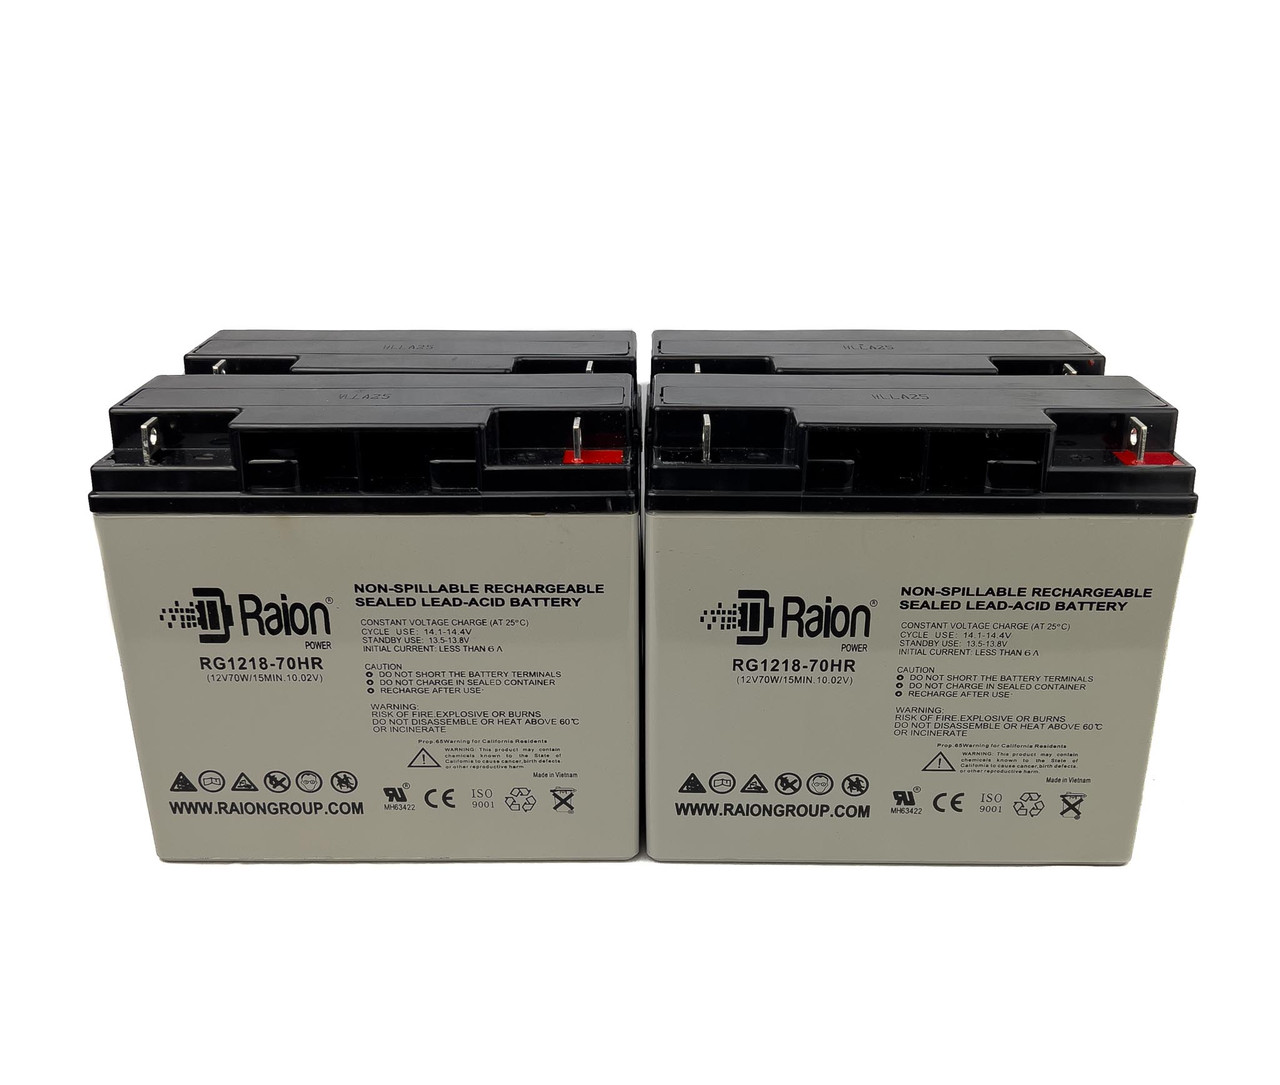 Raion Power RG1218-70HR 12V 18Ah Replacement UPS Battery for Alpha Technologies ALIBP2/3000T (033-747-20) - 4 Pack